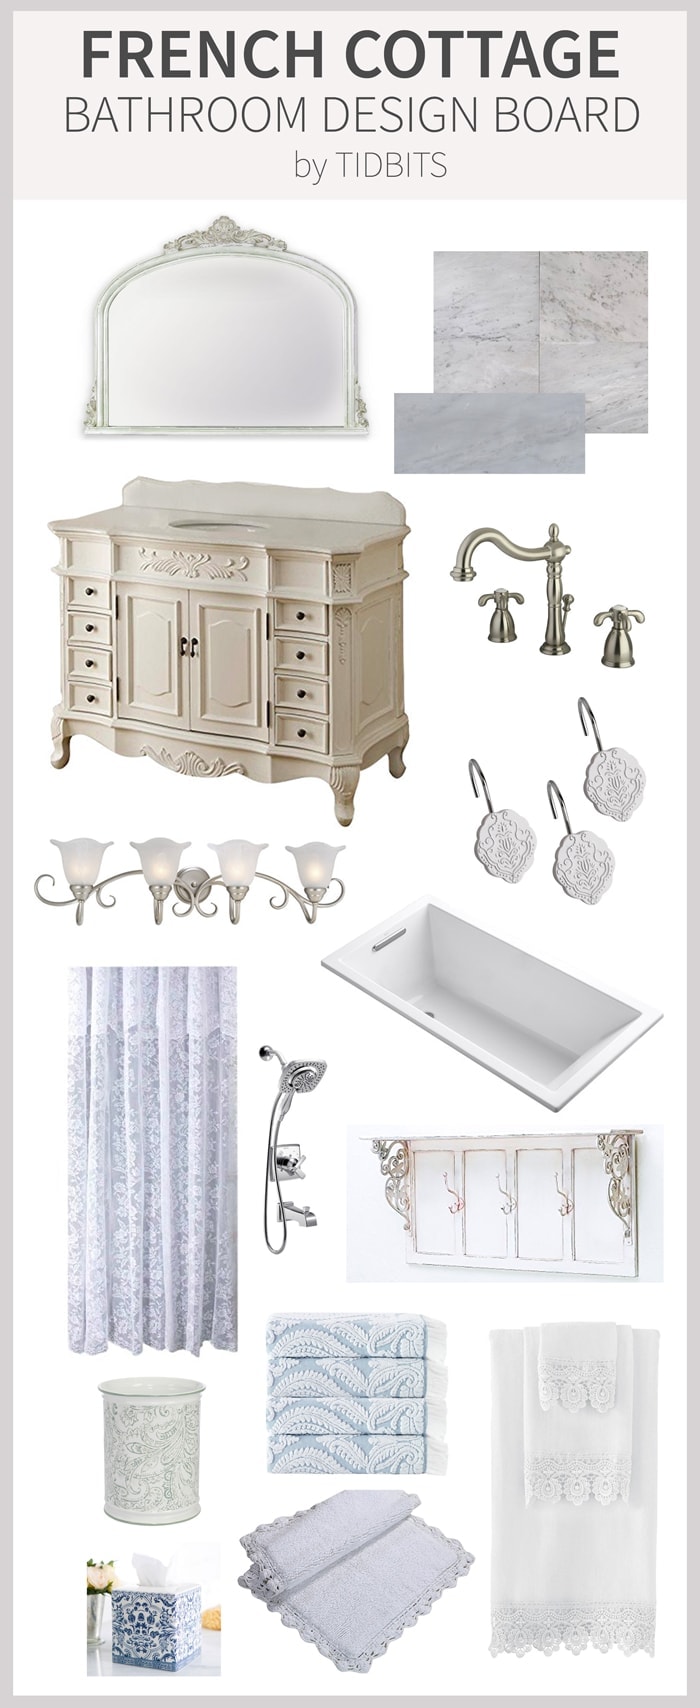 French Cottage Bathroom Design Board, by TIDBITS.